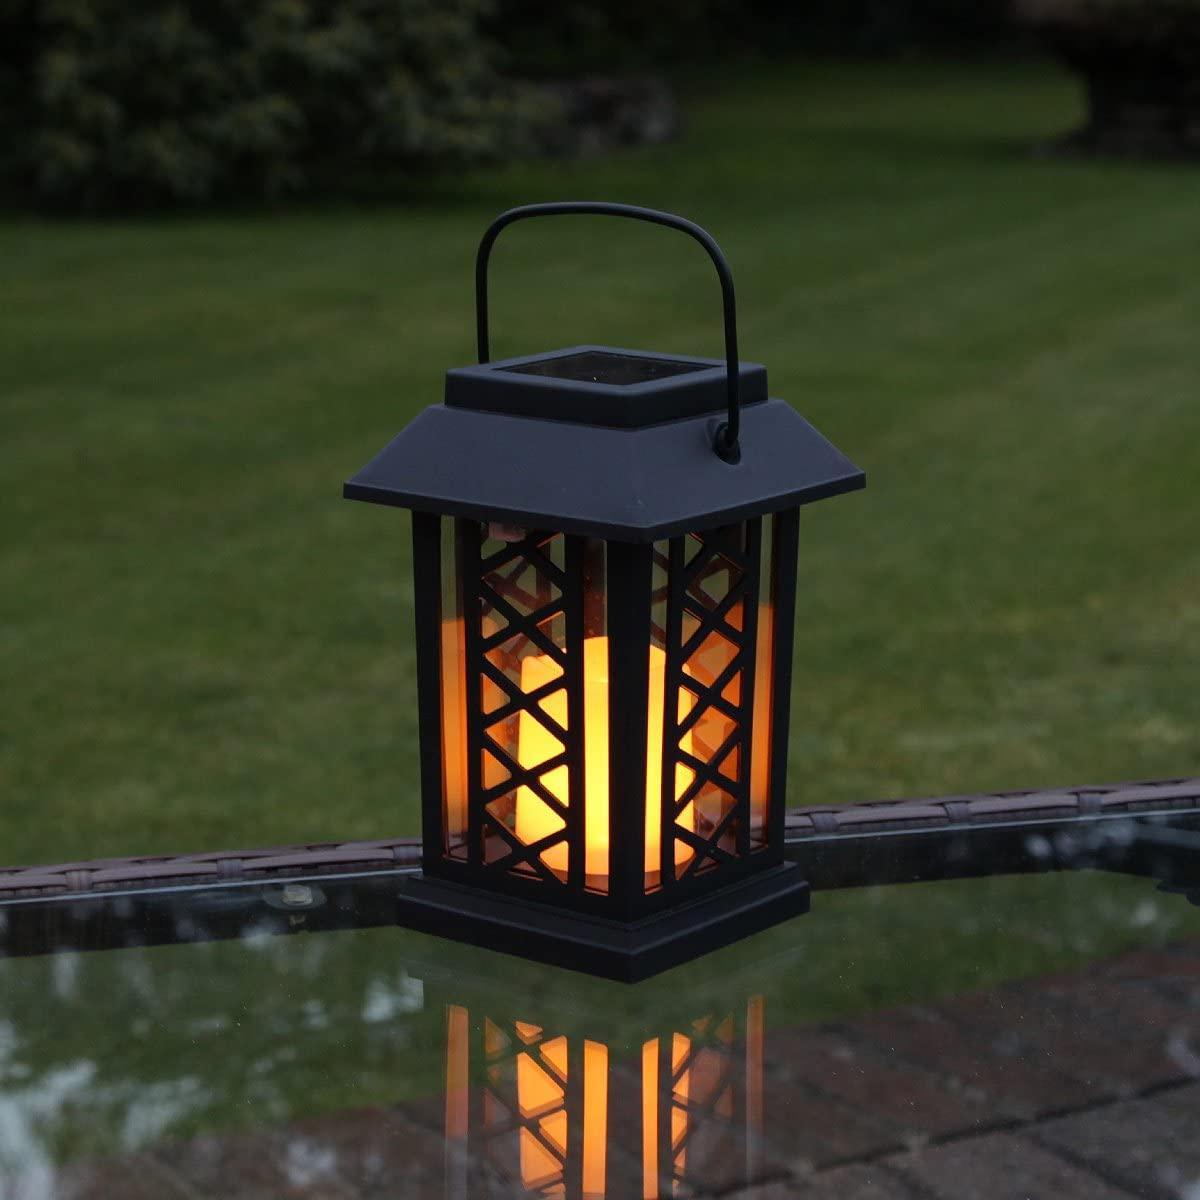 Solar Powered Flickering LED Candle Trellis Garden Lantern, 17.5cm - Home Inspired Gifts